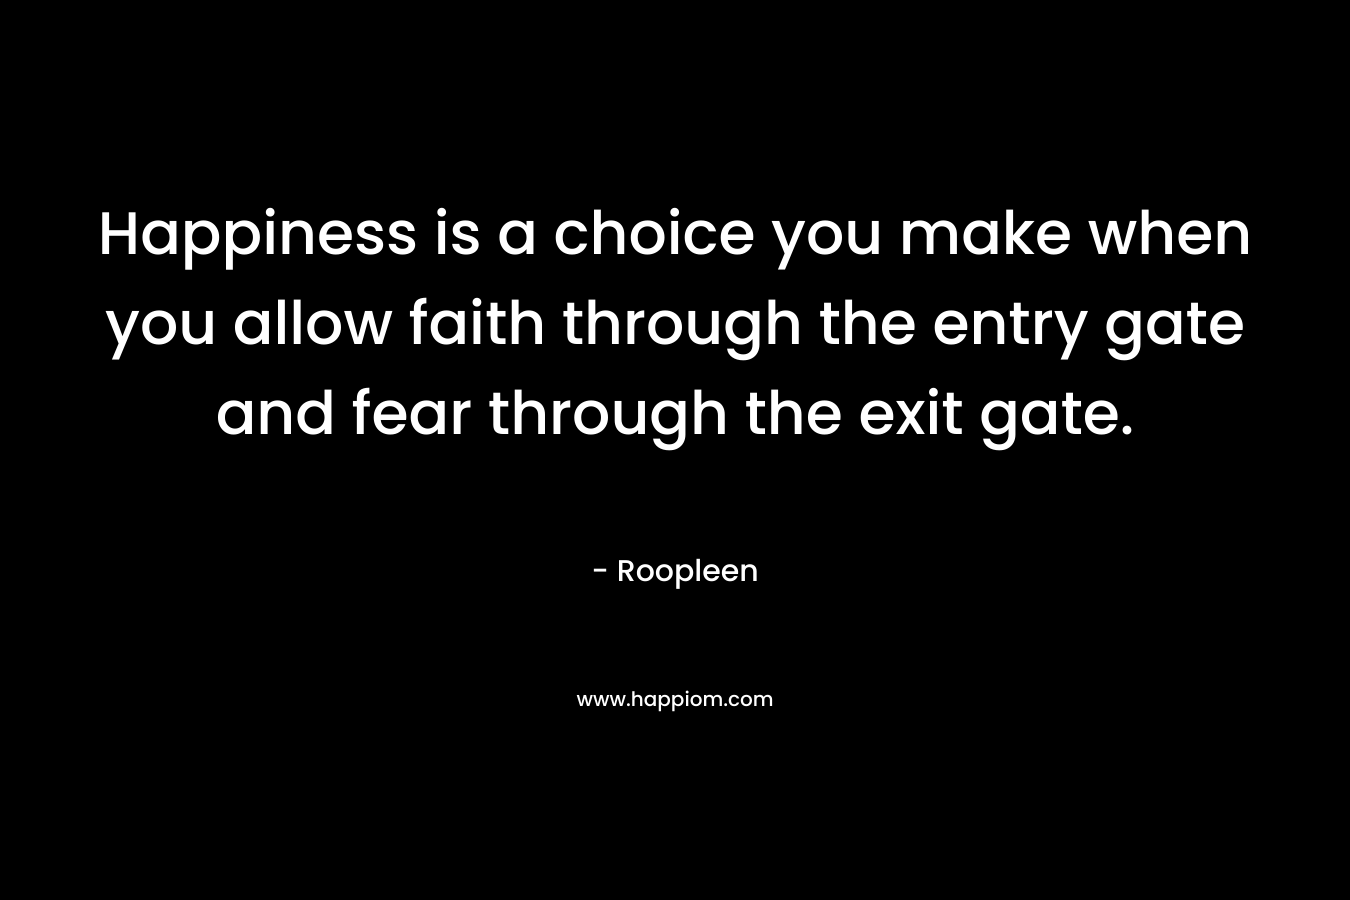 Happiness is a choice you make when you allow faith through the entry gate and fear through the exit gate.